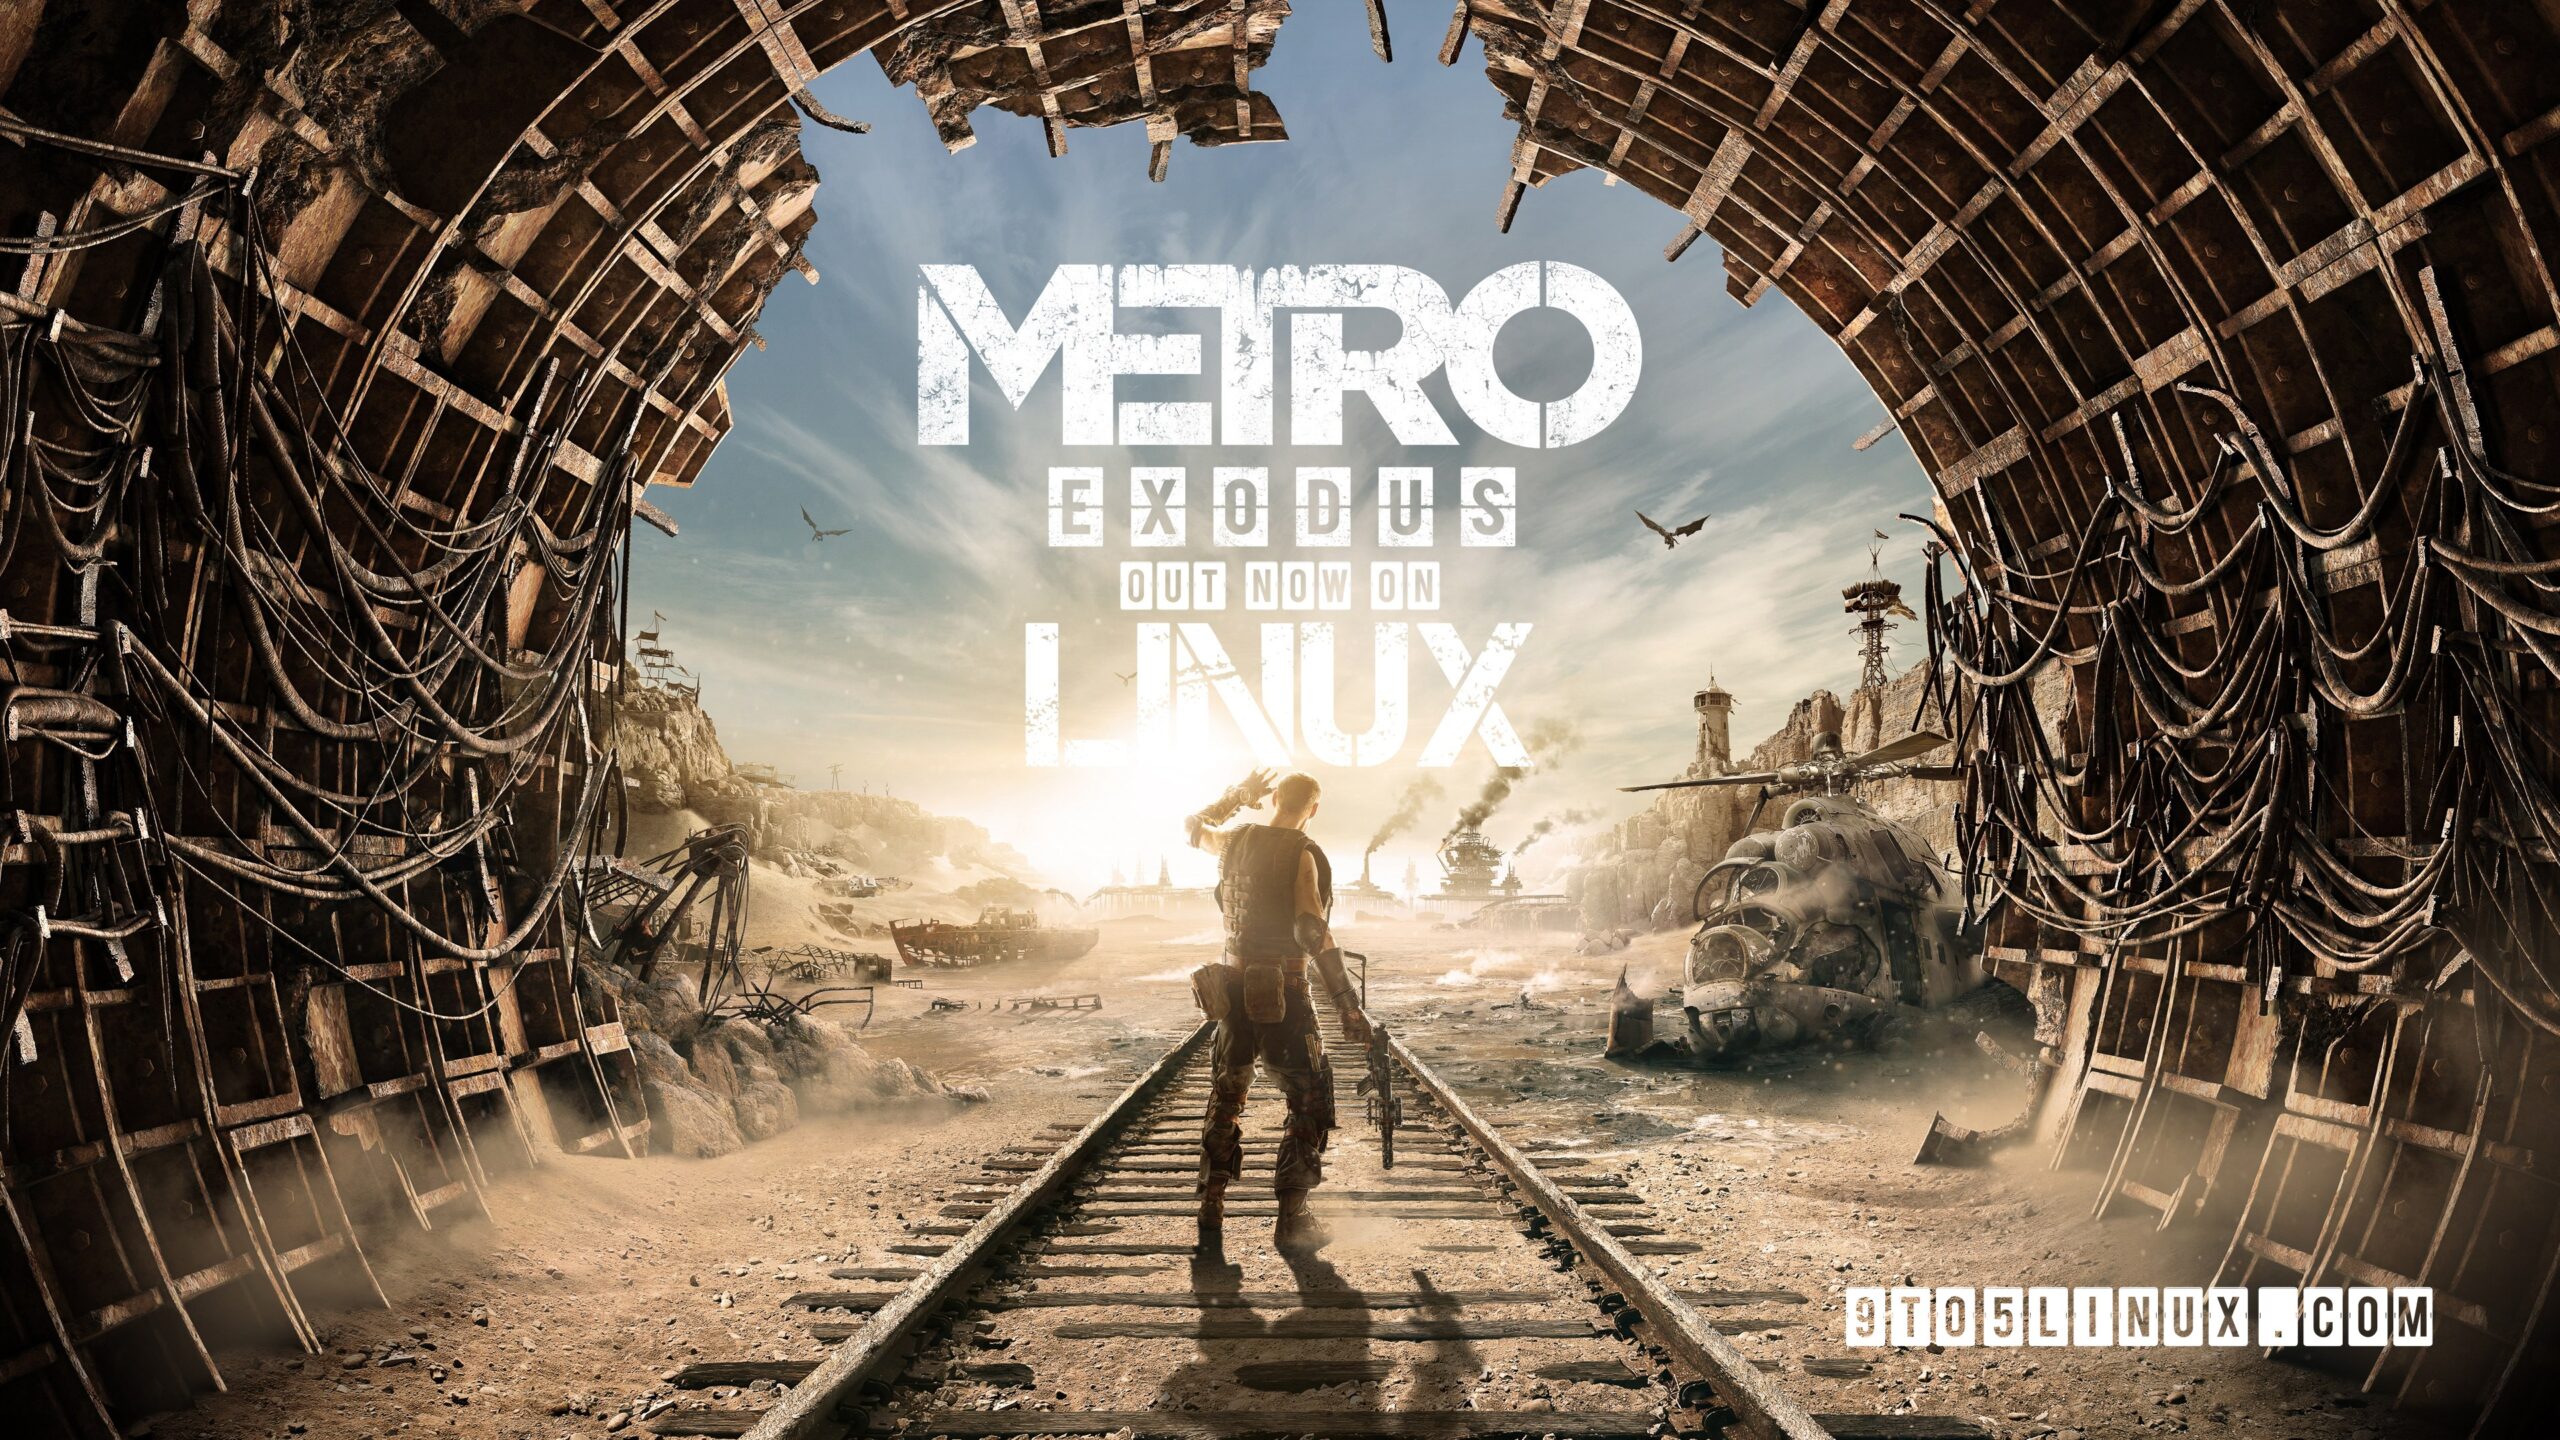 Metro Exodus Is Out Now on Steam for Linux